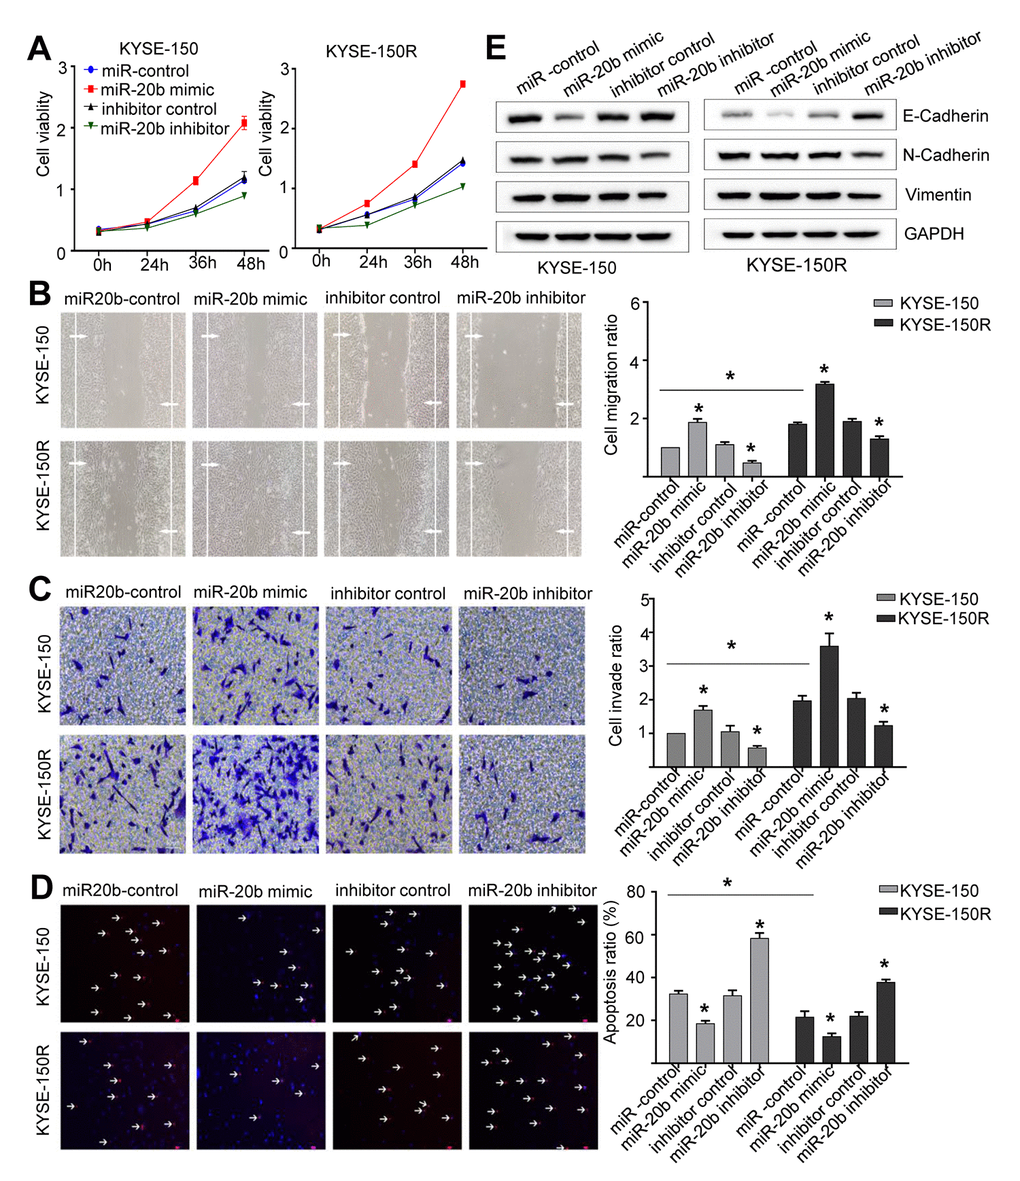 miR-20b promotes cell proliferation, migration invasion, the EMT process and inhibits apoptosis. KYSE-150 and KYSE-150R cells were transfected with miR-20b mimic or miR-20b inhibitor or their corresponding negative controls. (A) The cell proliferation assay was performed at the indicated time points. (B) Representative micrographs of cell migration assays (left) and the quantification (right). (C) Representative micrographs of cell invasion assays (left) and the quantification (right). (D) Representative micrographs of cell apoptosis assays (left) and the quantification (right). (E) Western blot analysis revealed that the E-cadherin expression level was decreased, while N-cadherin and Vimentin expression levels were elevated in cells transfected with miR-20b mimic. Data are shown as mean ± SD from three independent experiments. *P